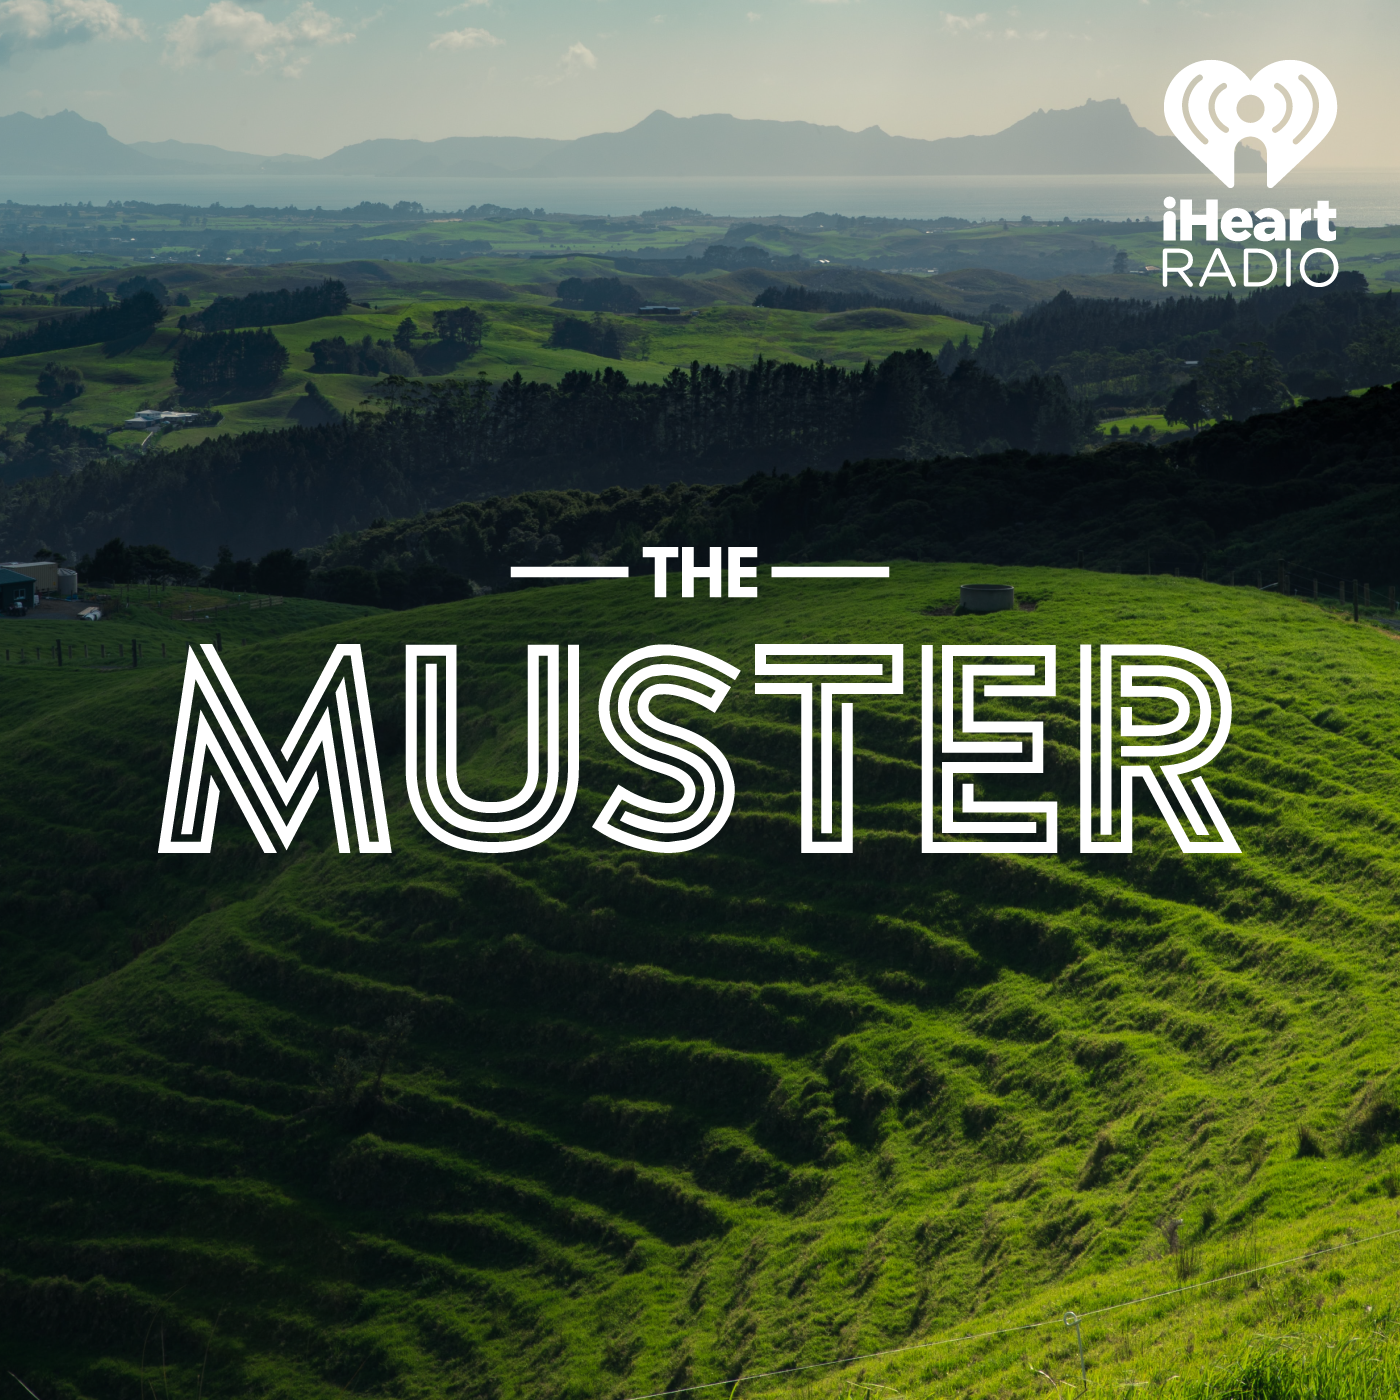 The Muster- David Stevens: Looking Ahead To One Final Sale